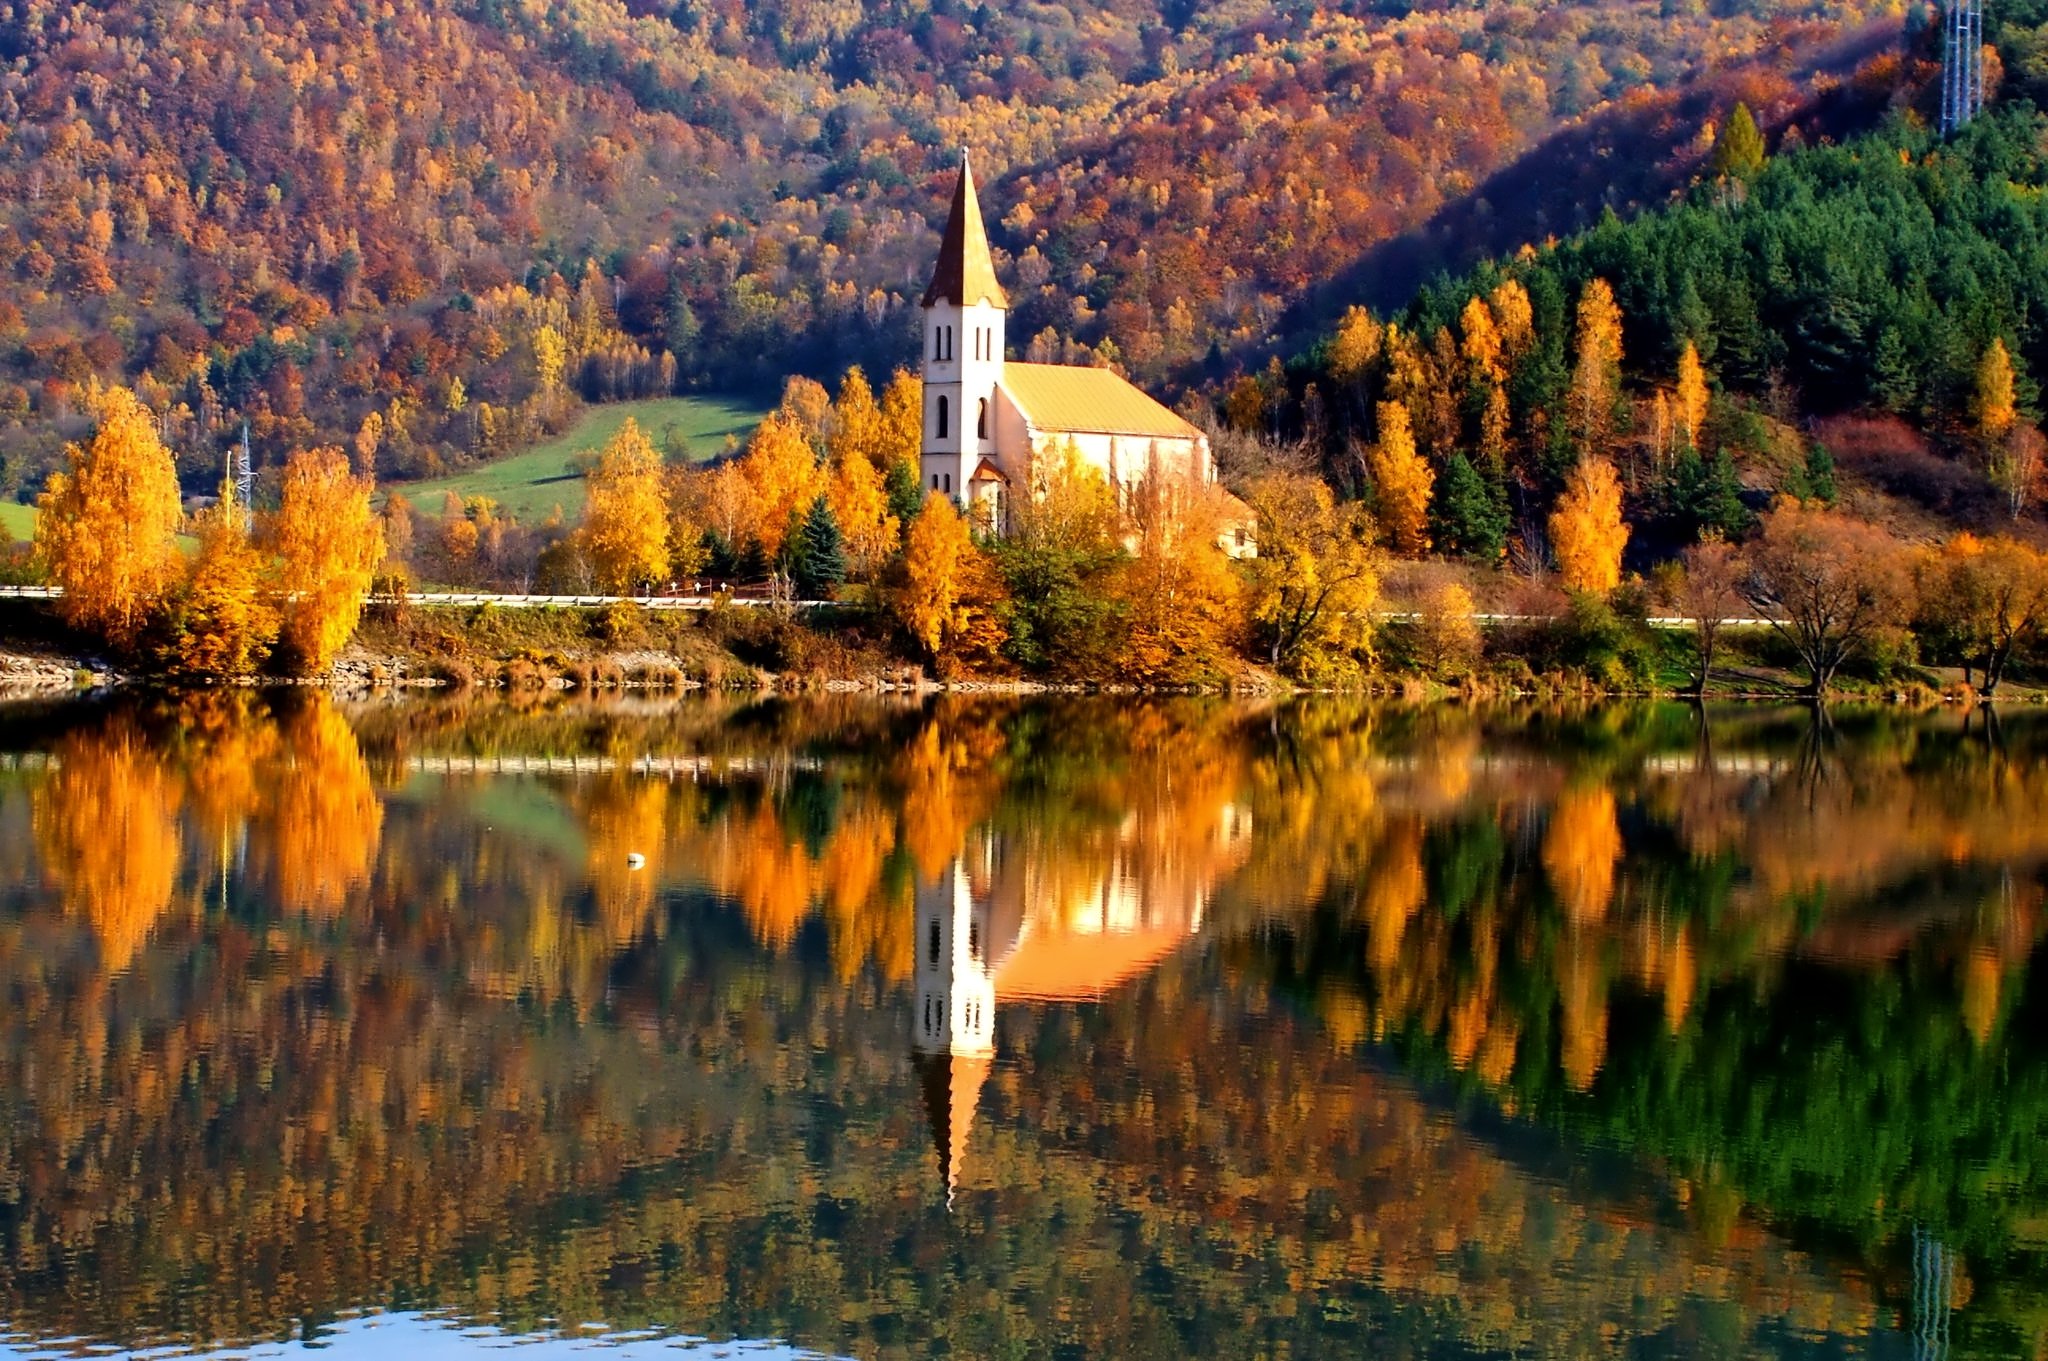 autumn, Fall, Landscape, Nature, Tree, Forest, Leaf, Leaves, Path, Reflection, Lake, Religion, Church Wallpaper